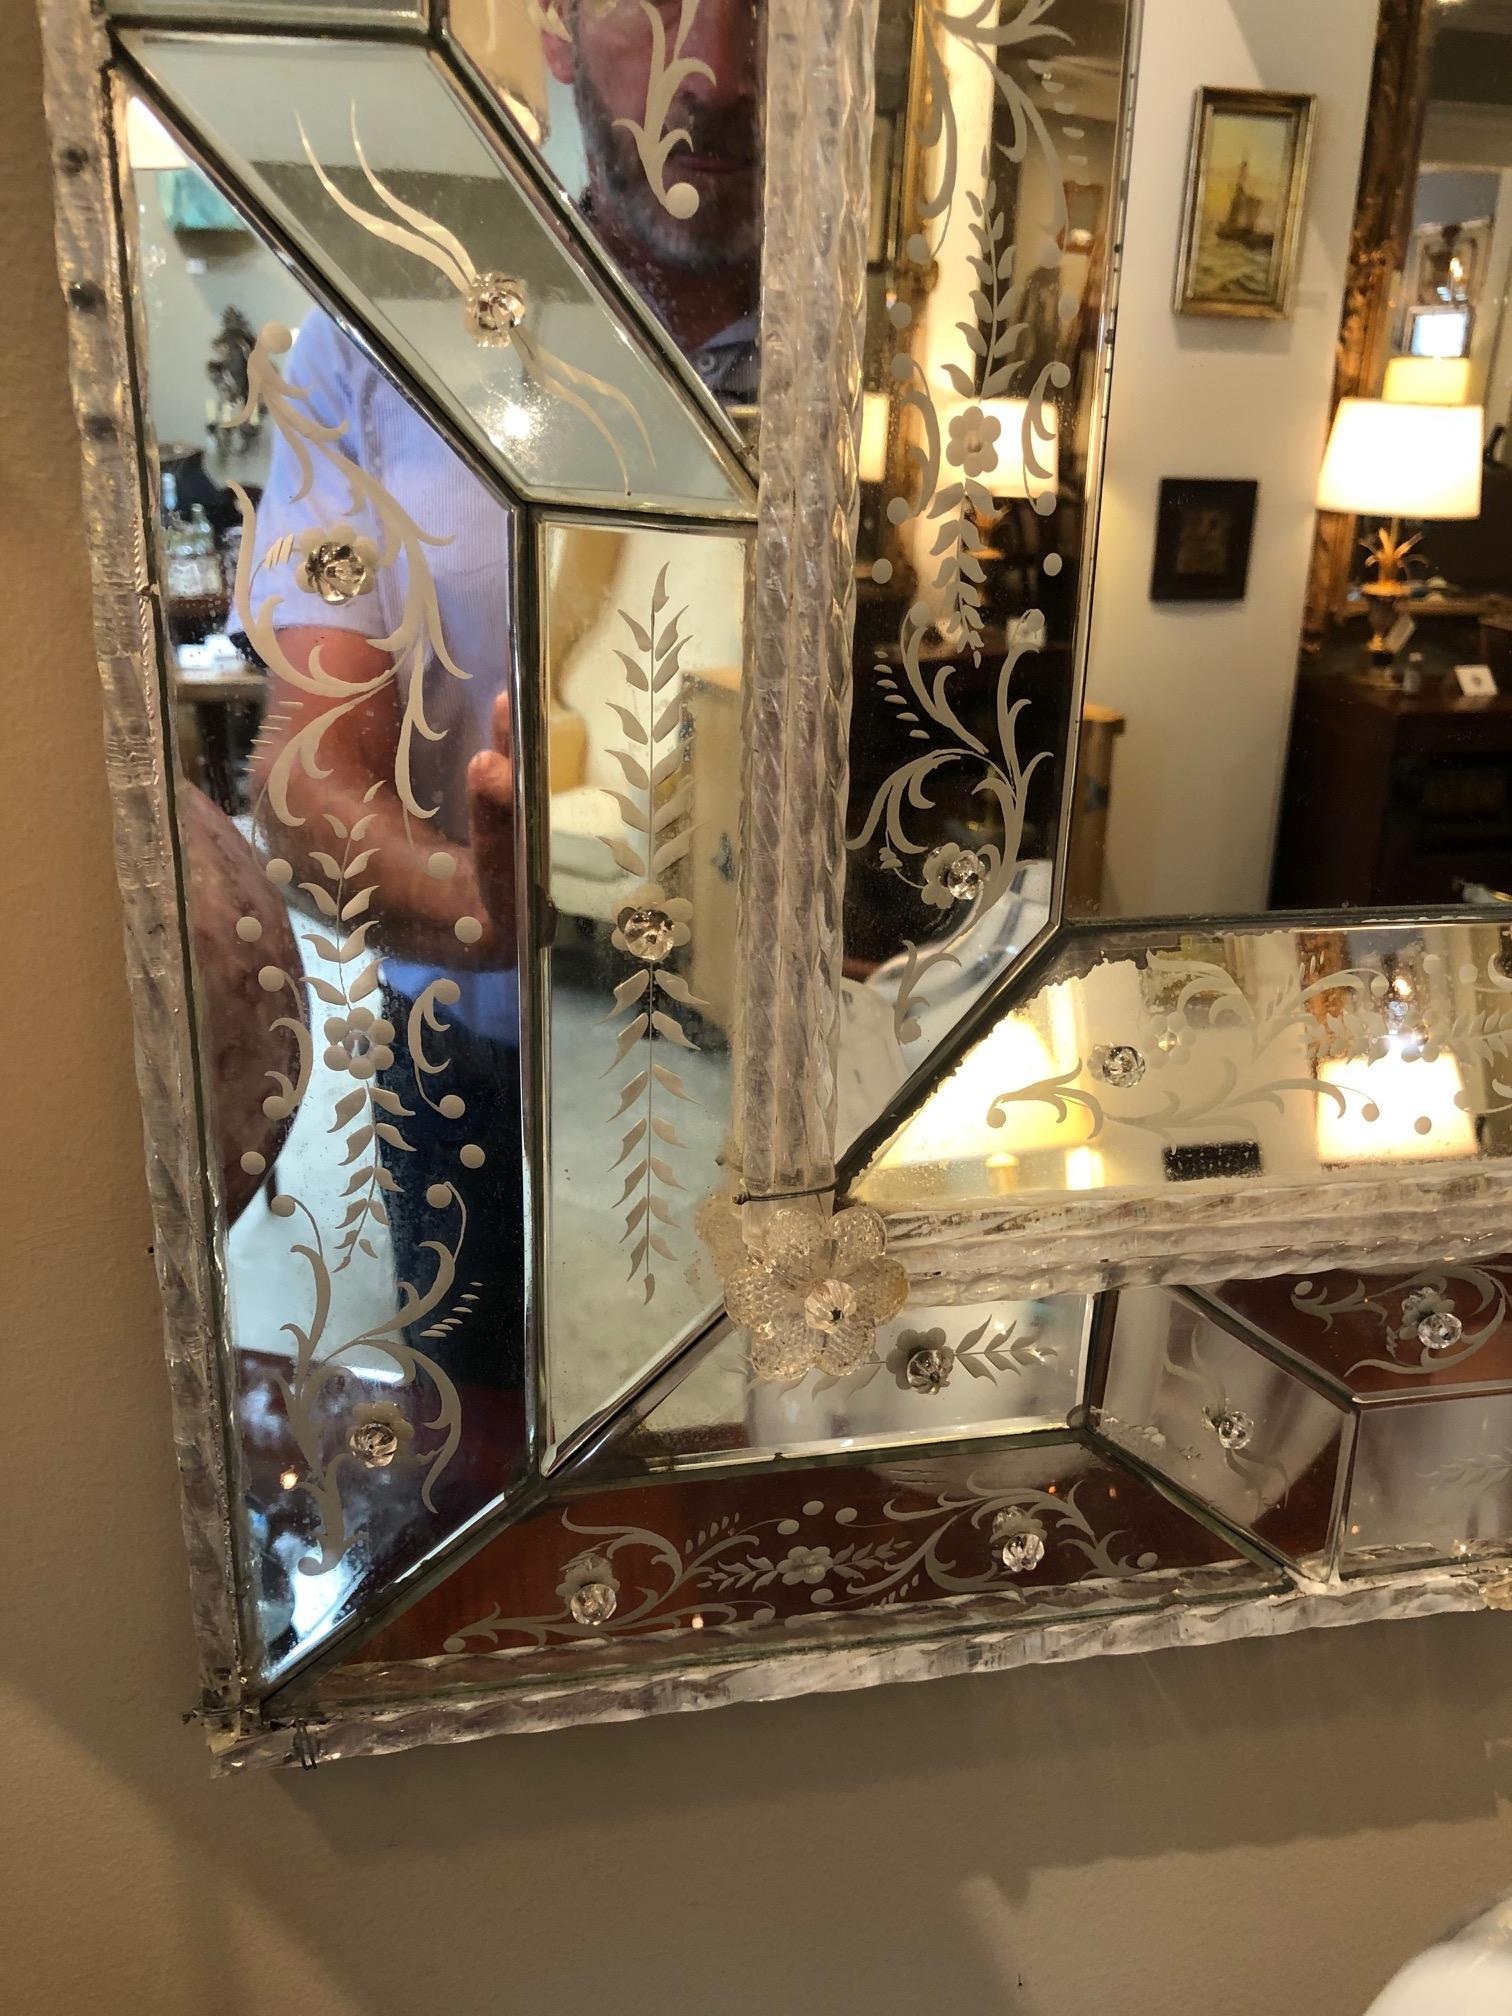 The central mirror plate within an outer frame of geometric reverse-etched mirrored elements secured with glass floral-form posts.